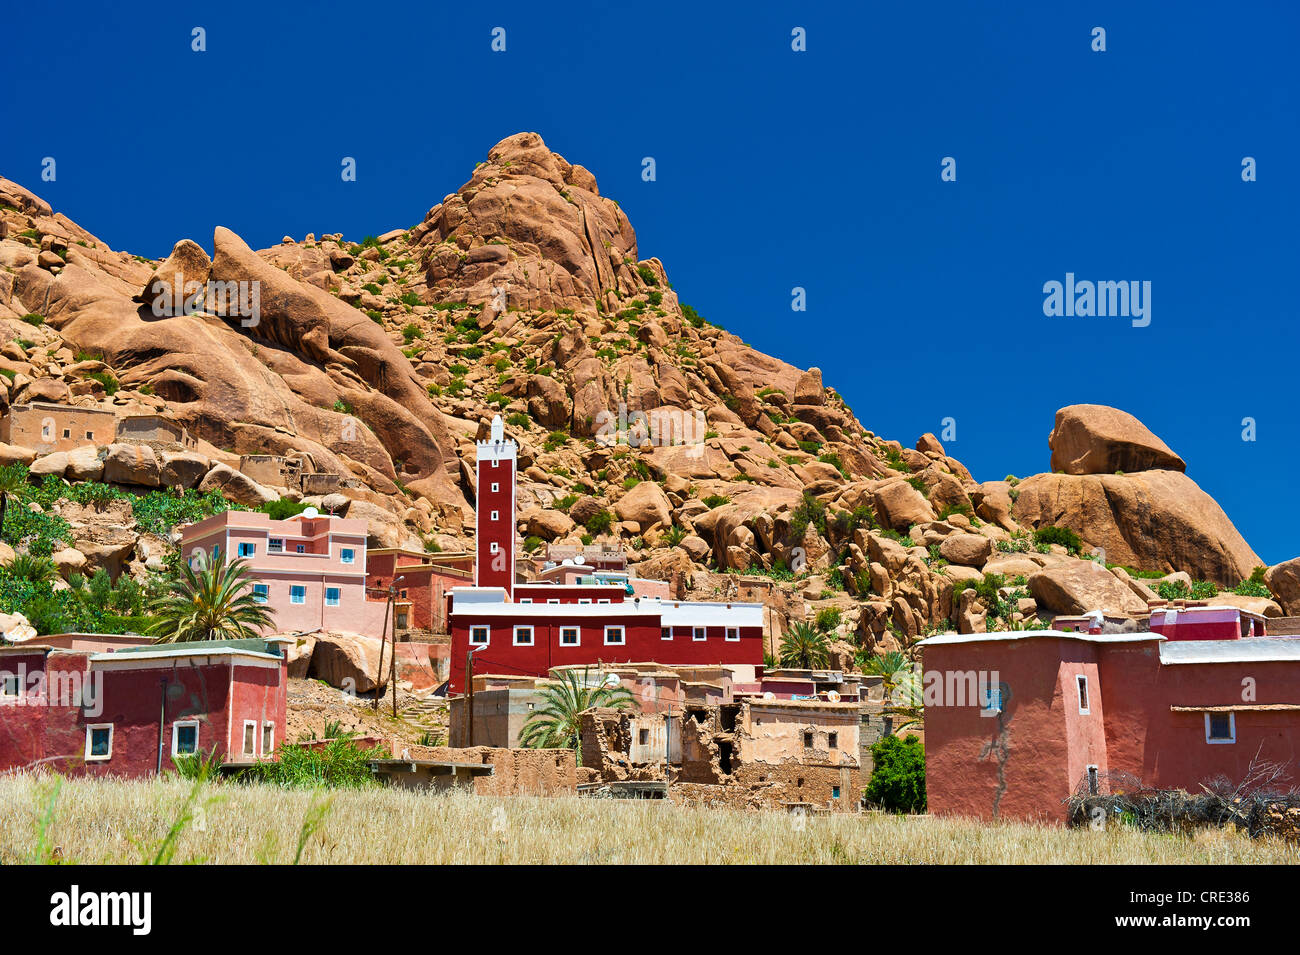 Houses and a mosque with a minaret in typical rocky landscape of granite boulders, Tafraoute, Anti-Atlas Mountains Stock Photo